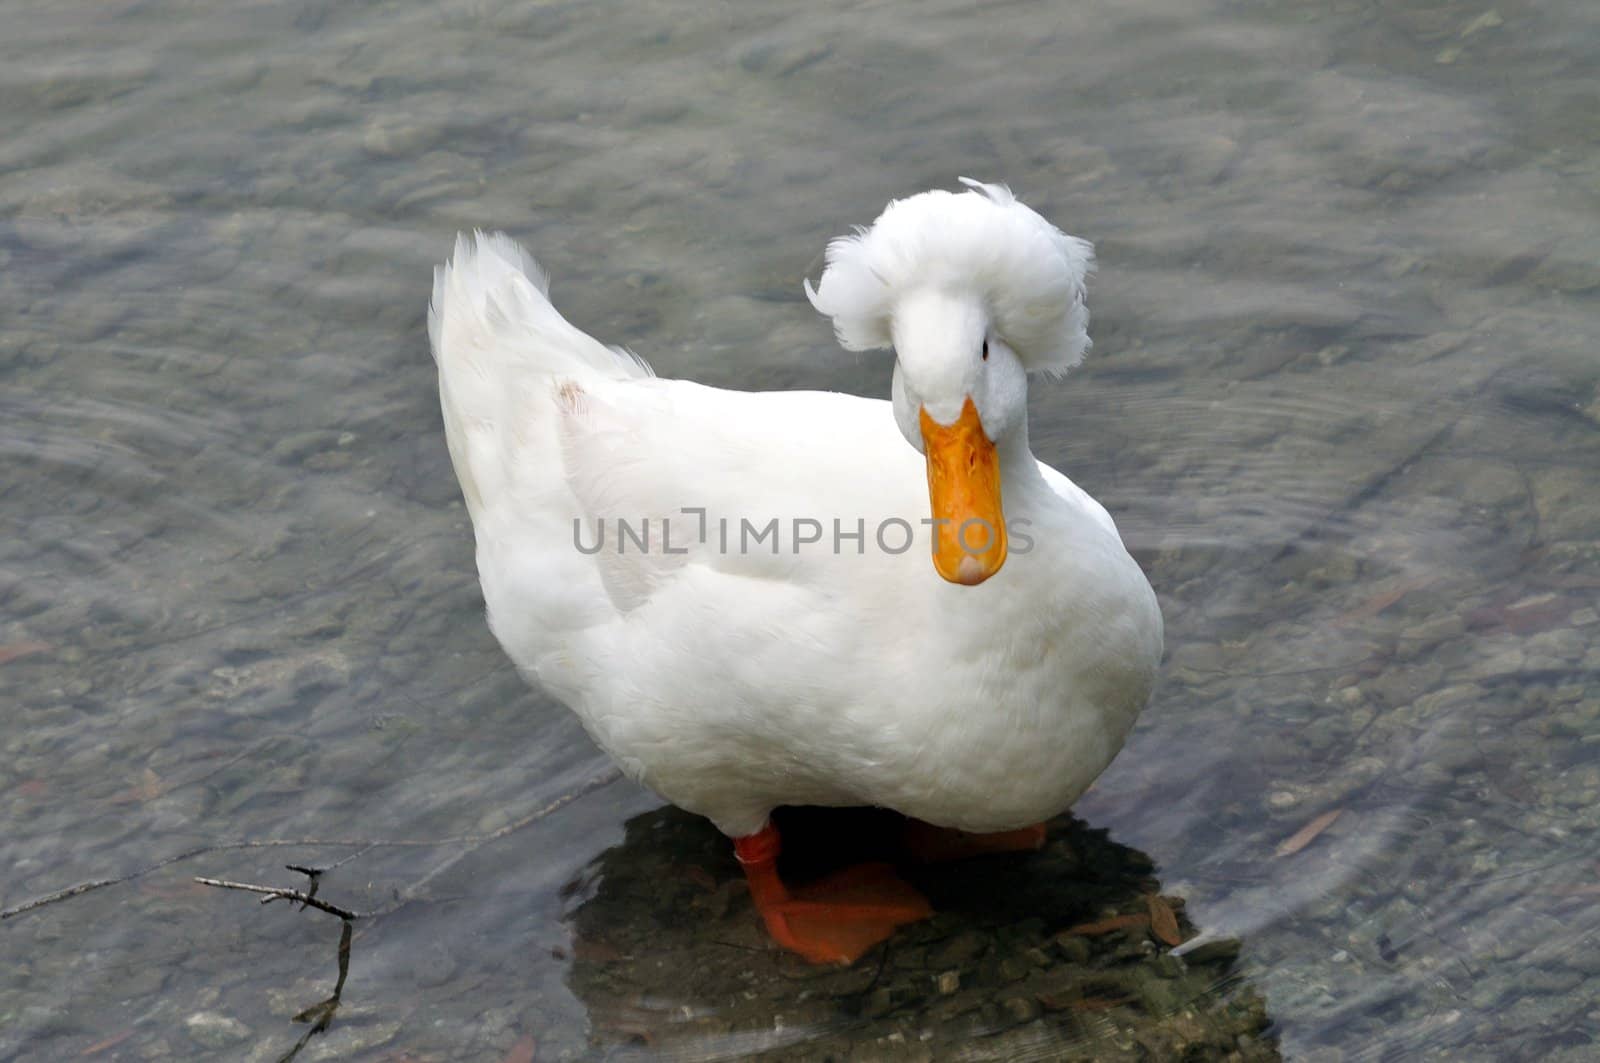 A white crested duck in a lake looks at the camera